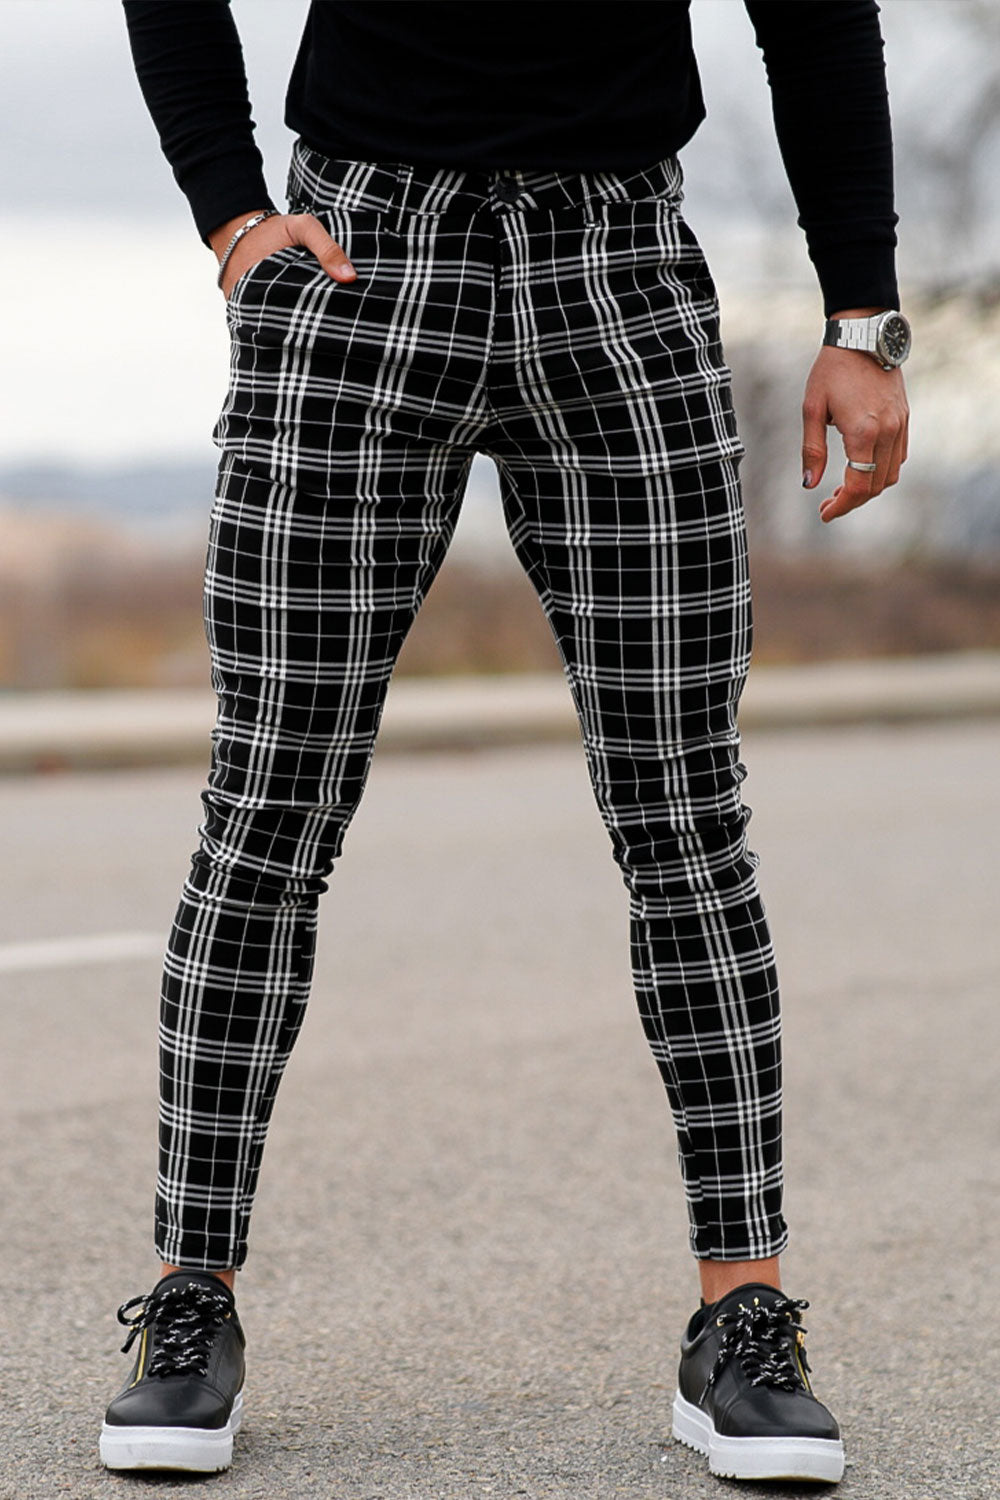 Gingtto New Mens Casual Plaid Chinos Pants Slim Fit-Black And White